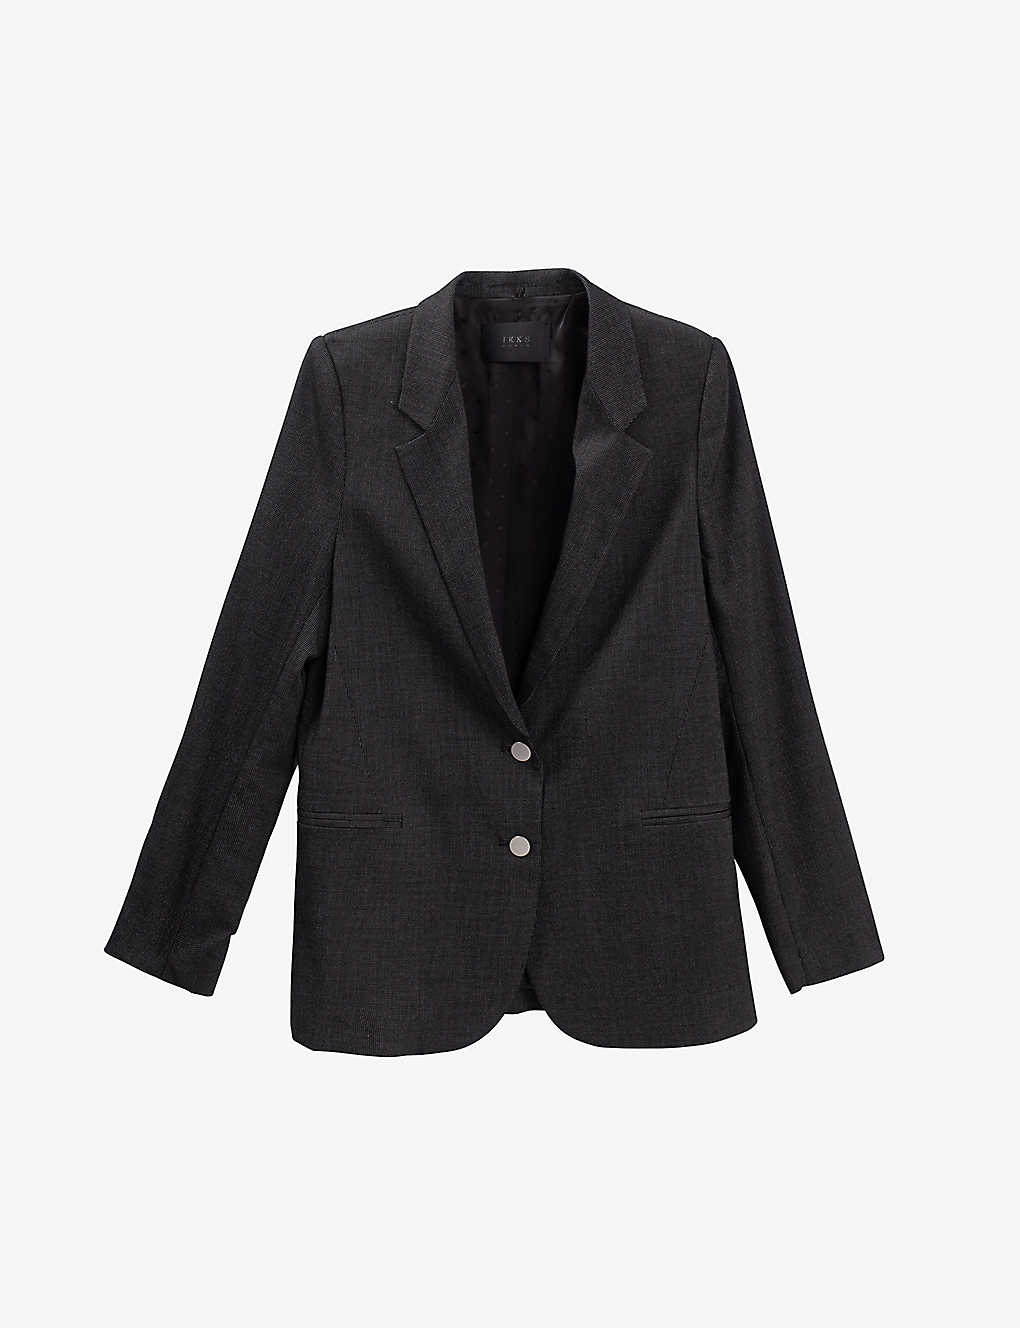 Ikks Womens Black Hooded Single-breasted Stretch-woven Suit Jacket